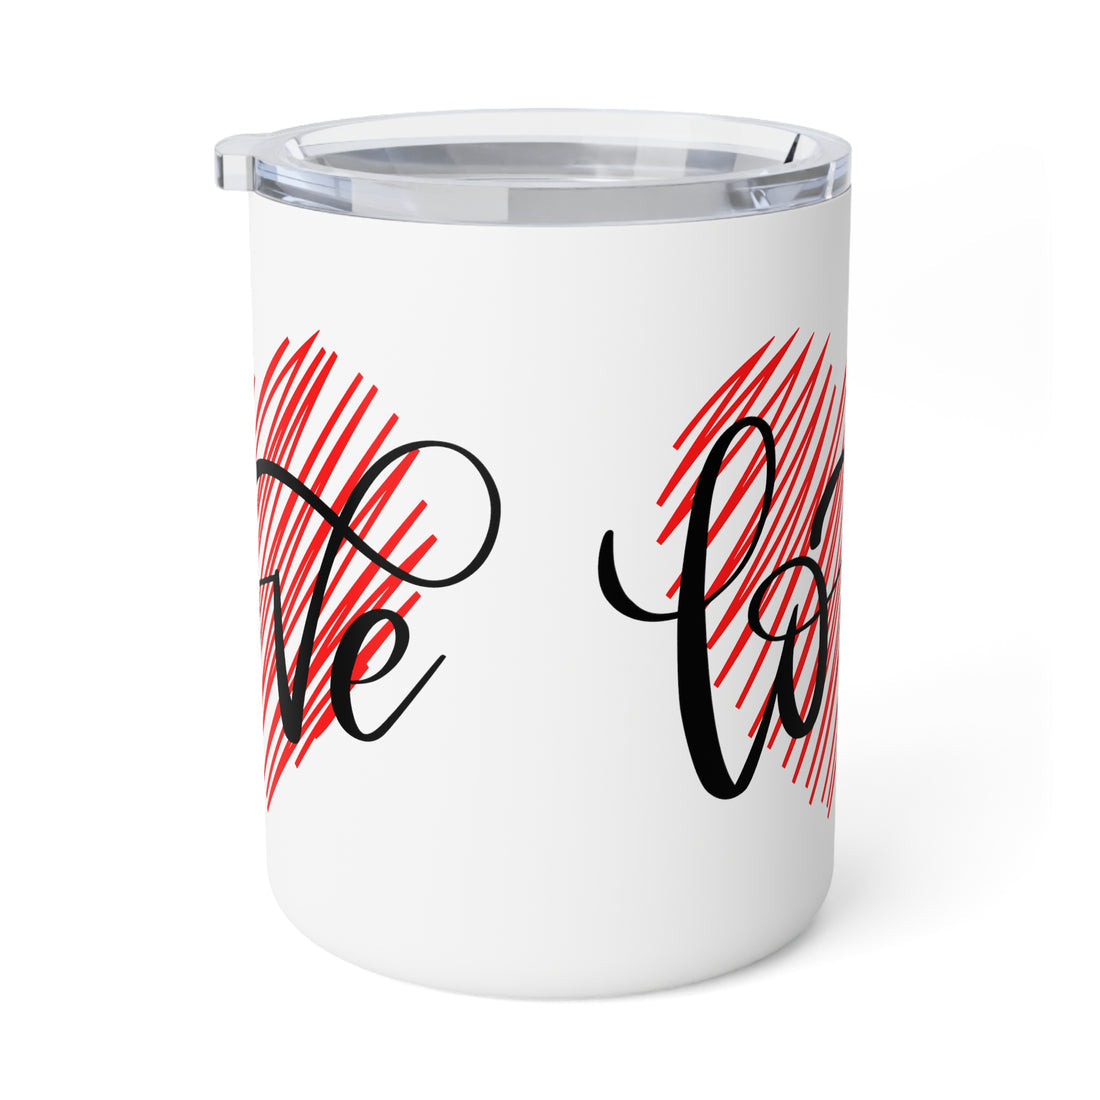 Love You Insulated Travel Coffee Mugs for Valentine's Day, 10 oz